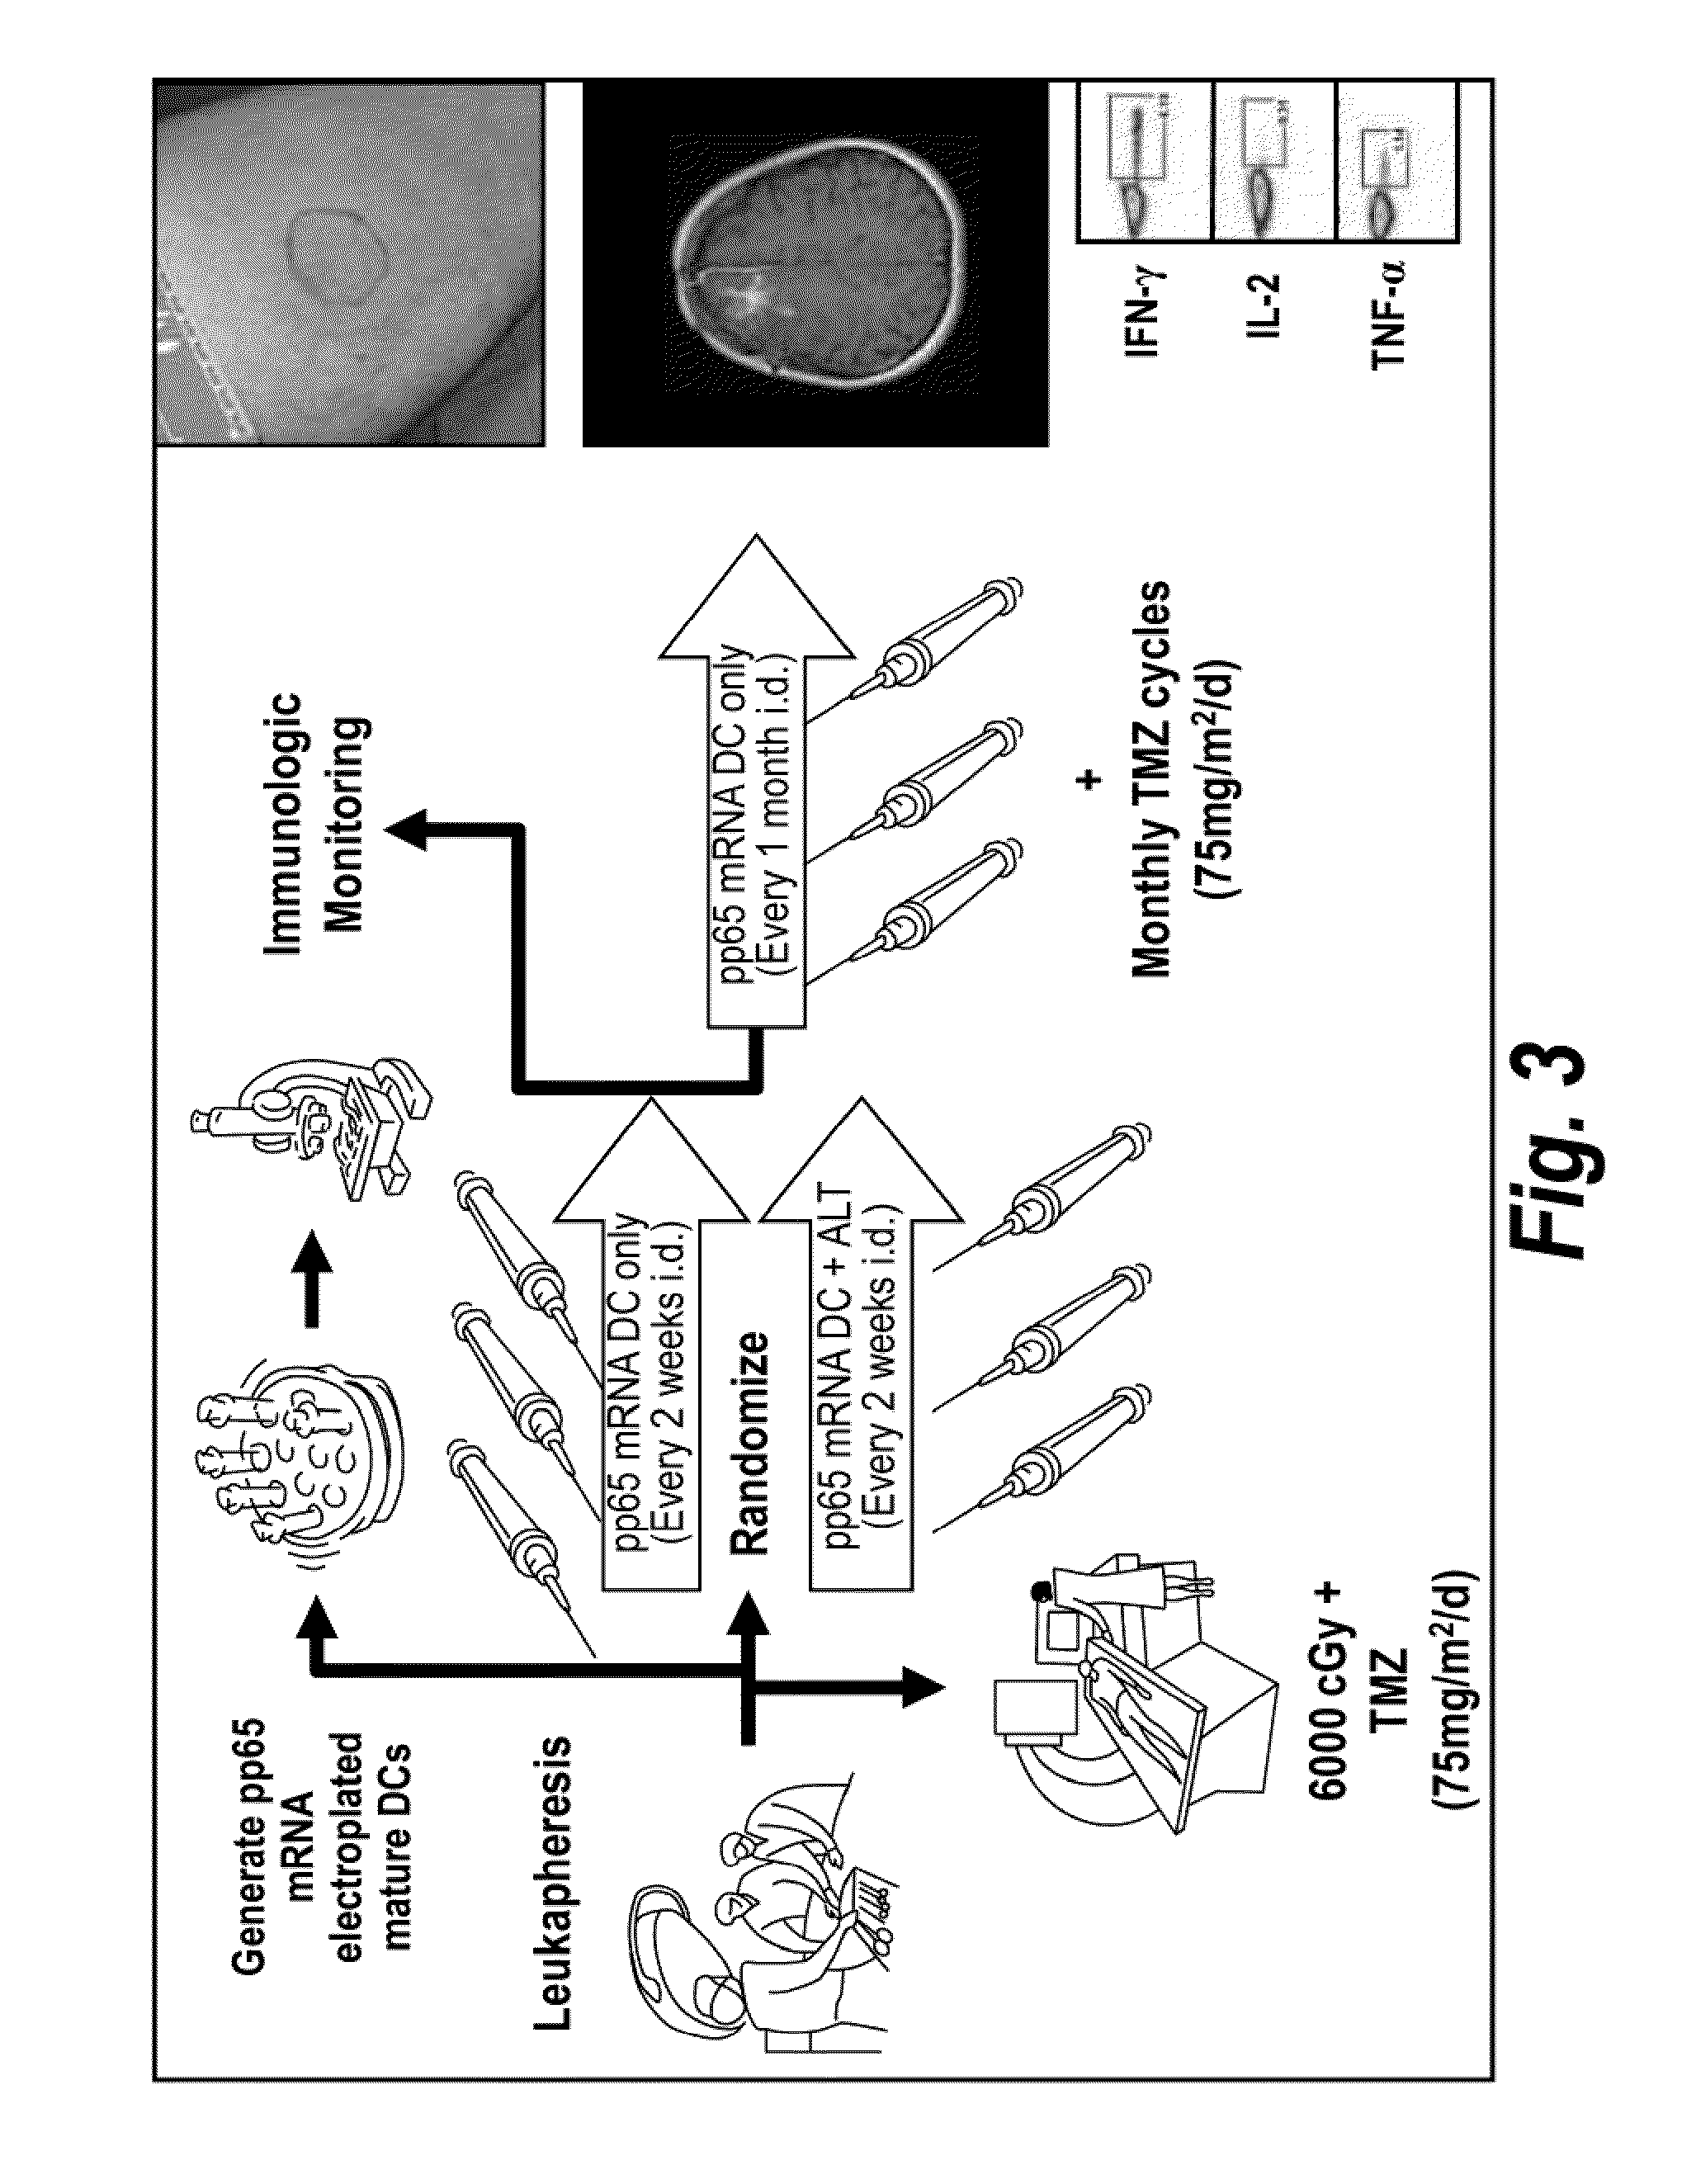 Compositions, methods, and kits for eliciting an immune response